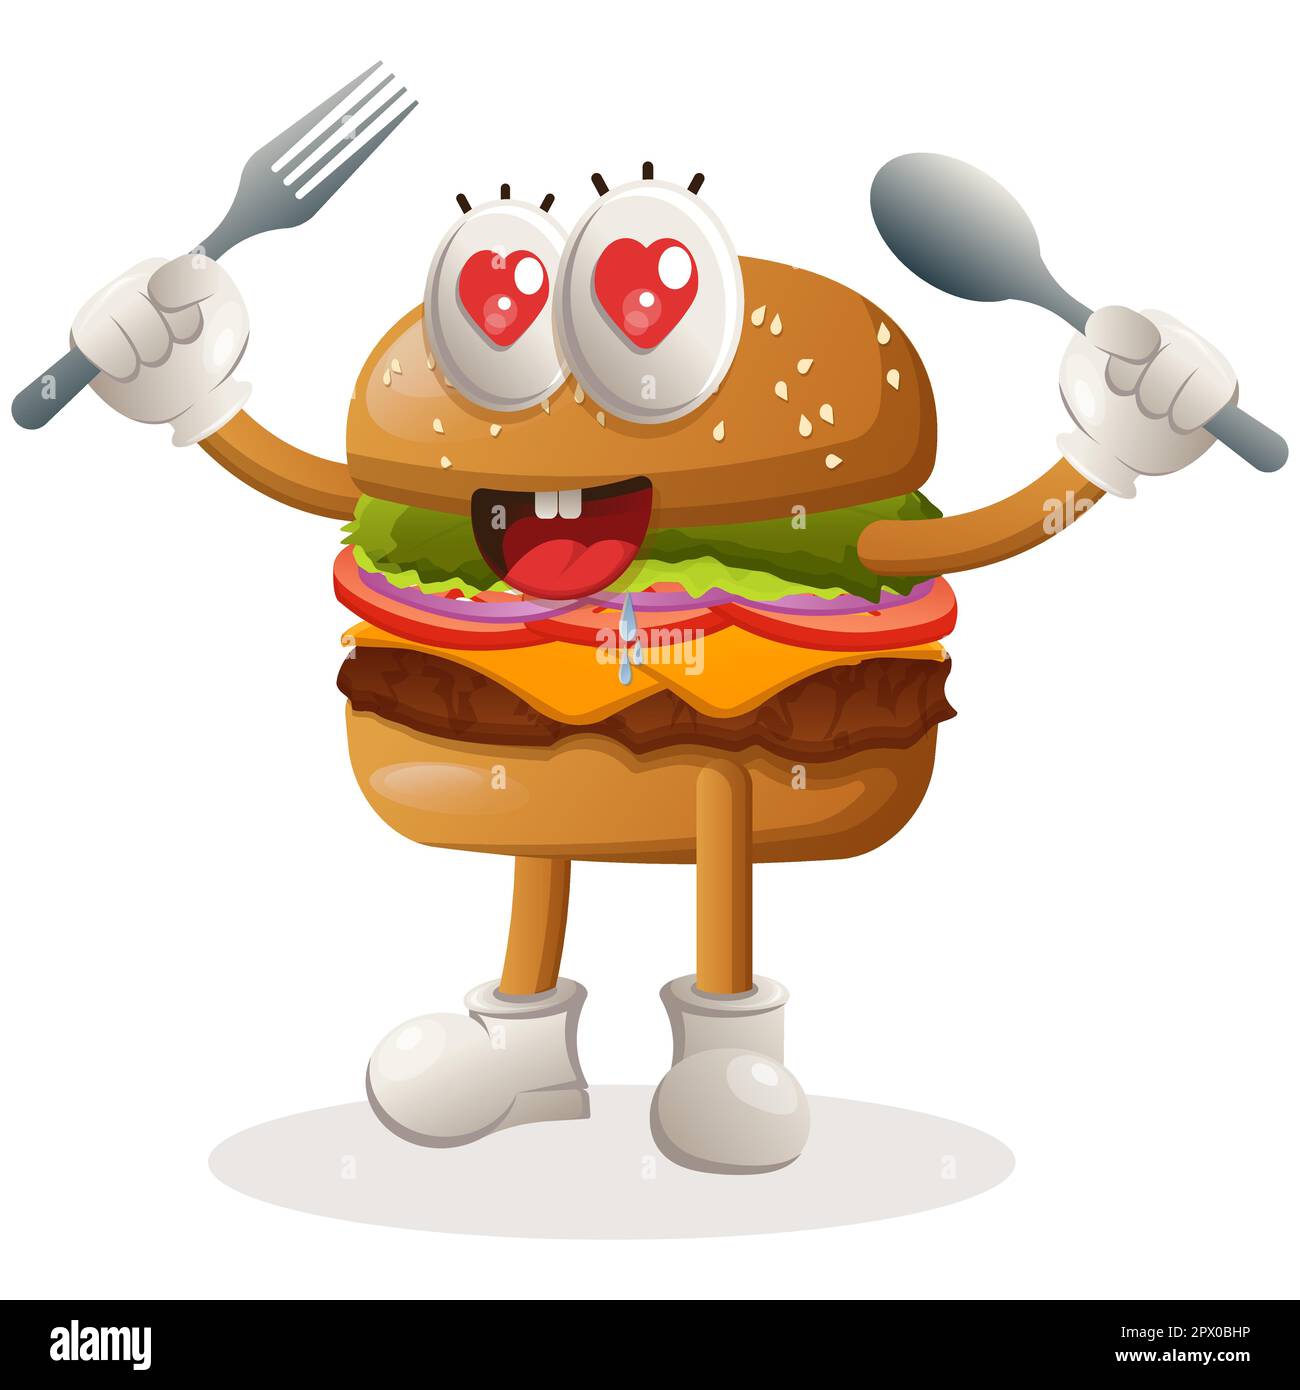 https://c8.alamy.com/comp/2PX0BHP/cute-burger-mascot-design-holding-spoon-and-fork-burger-cartoon-mascot-character-design-delicious-food-with-cheese-vegetables-and-meat-cute-mascot-2PX0BHP.jpg